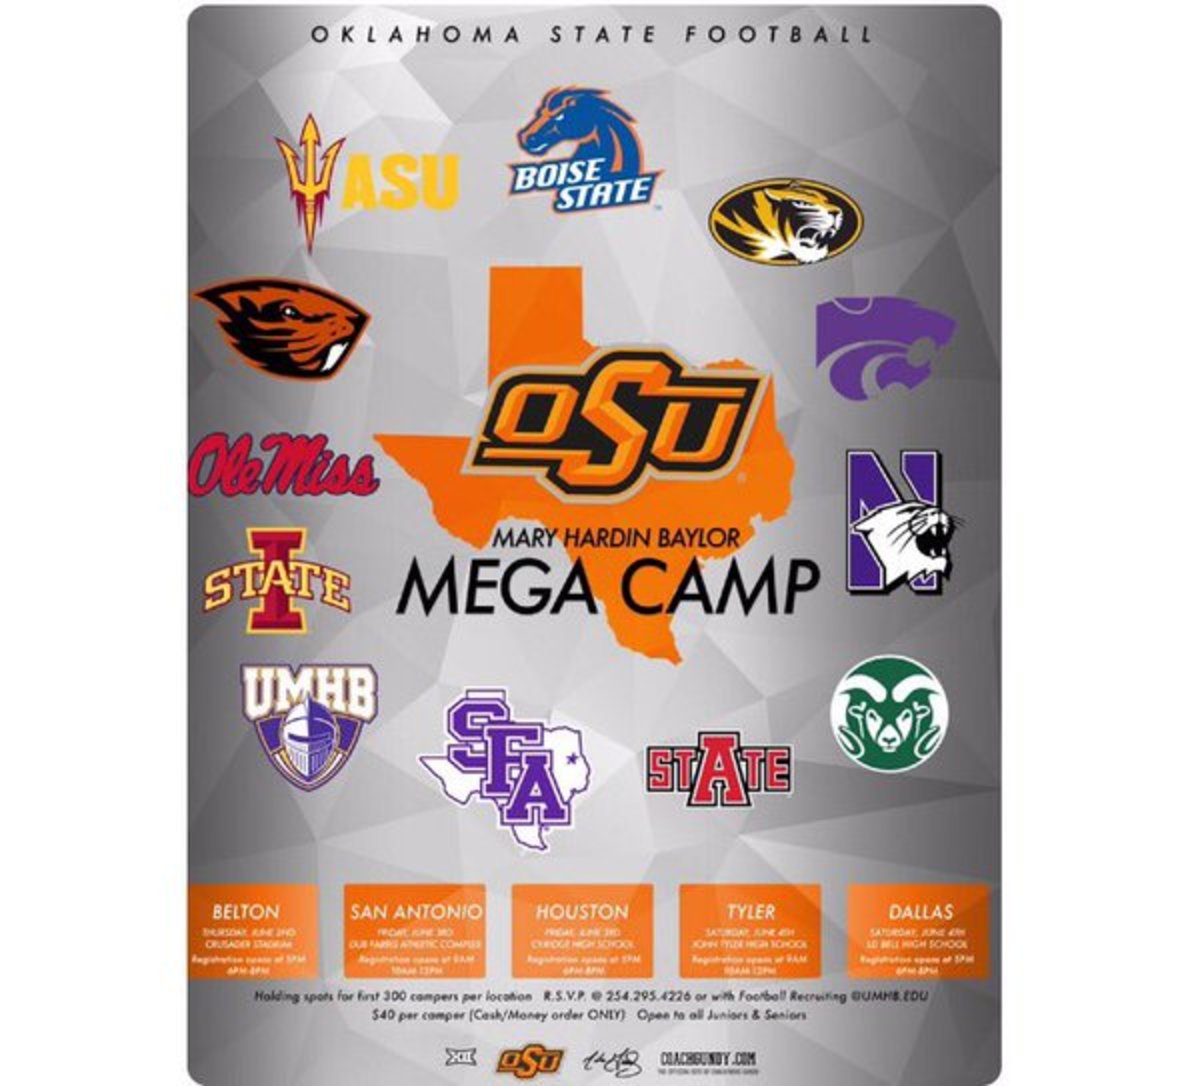 Mike Gundy has unveiled the "Walmart of football camps" FootballScoop